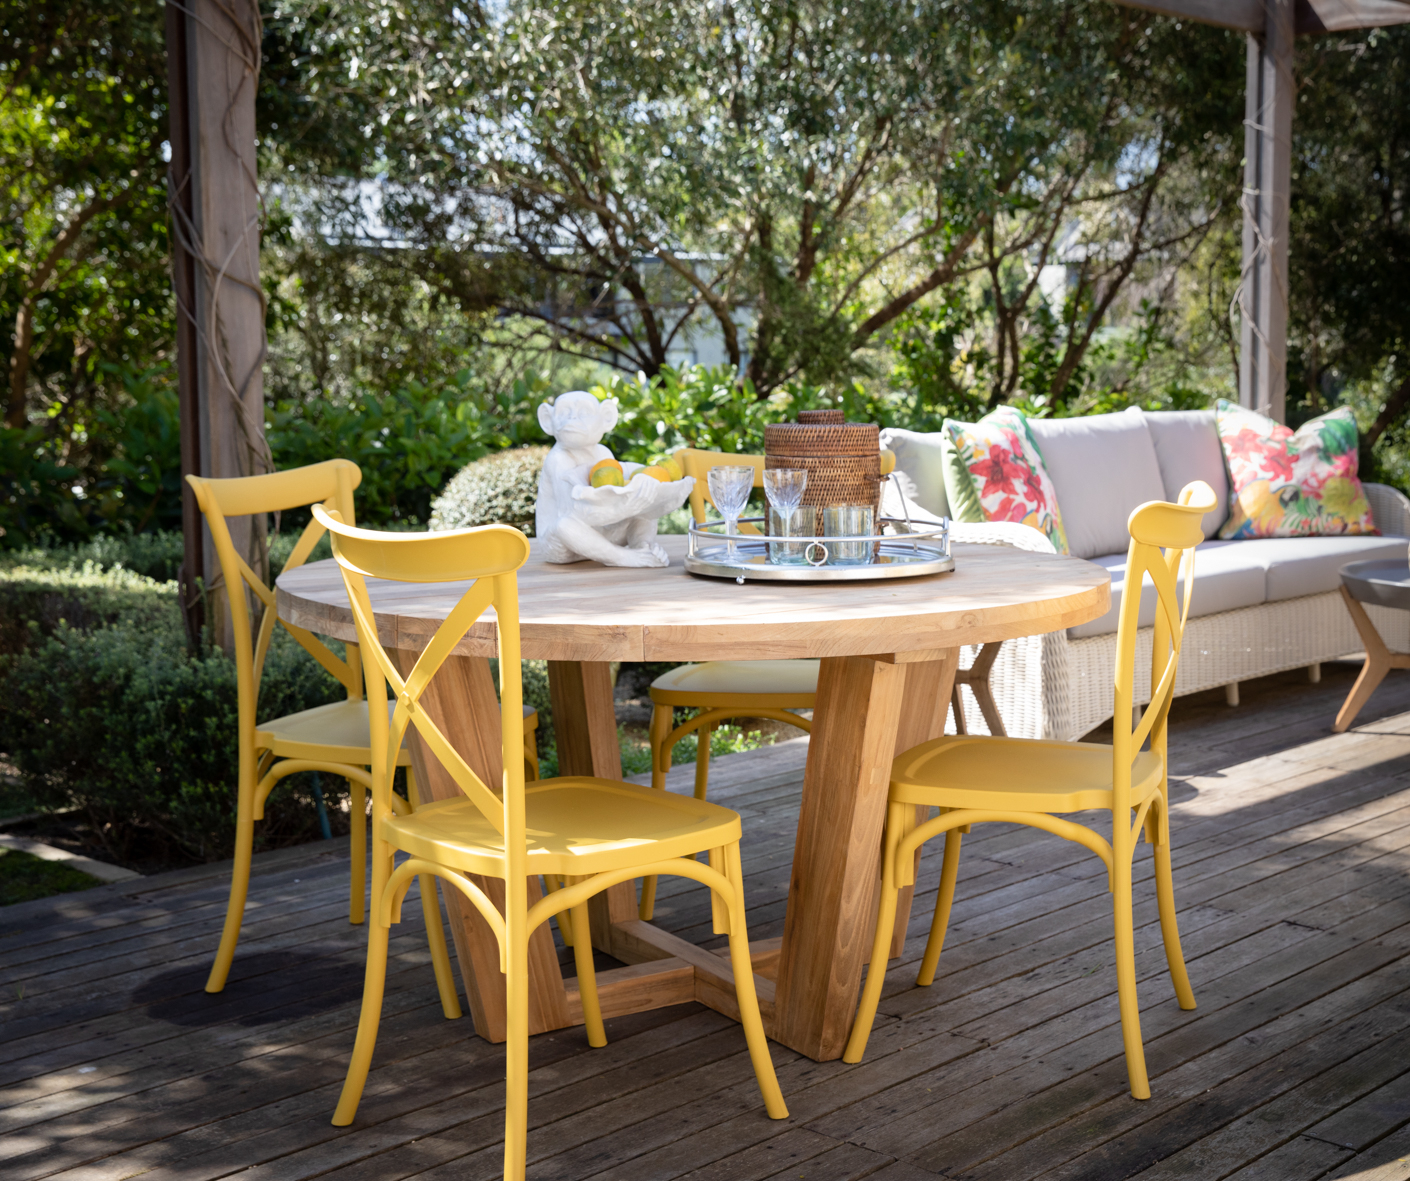 Cross Back PVC Yellow Dining Cafe Chair